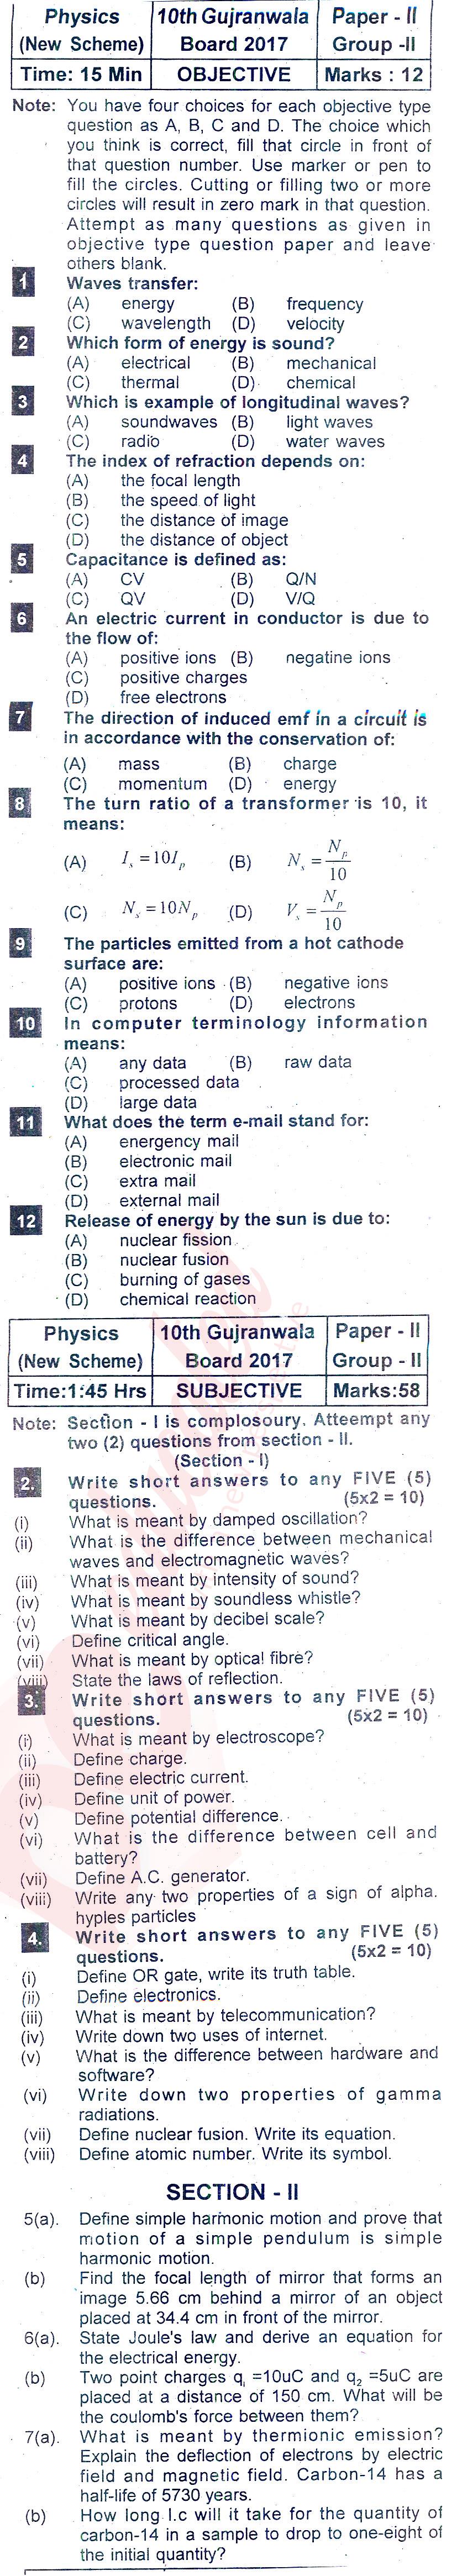 Physics 10th class Past Paper Group 2 BISE Gujranwala 2017